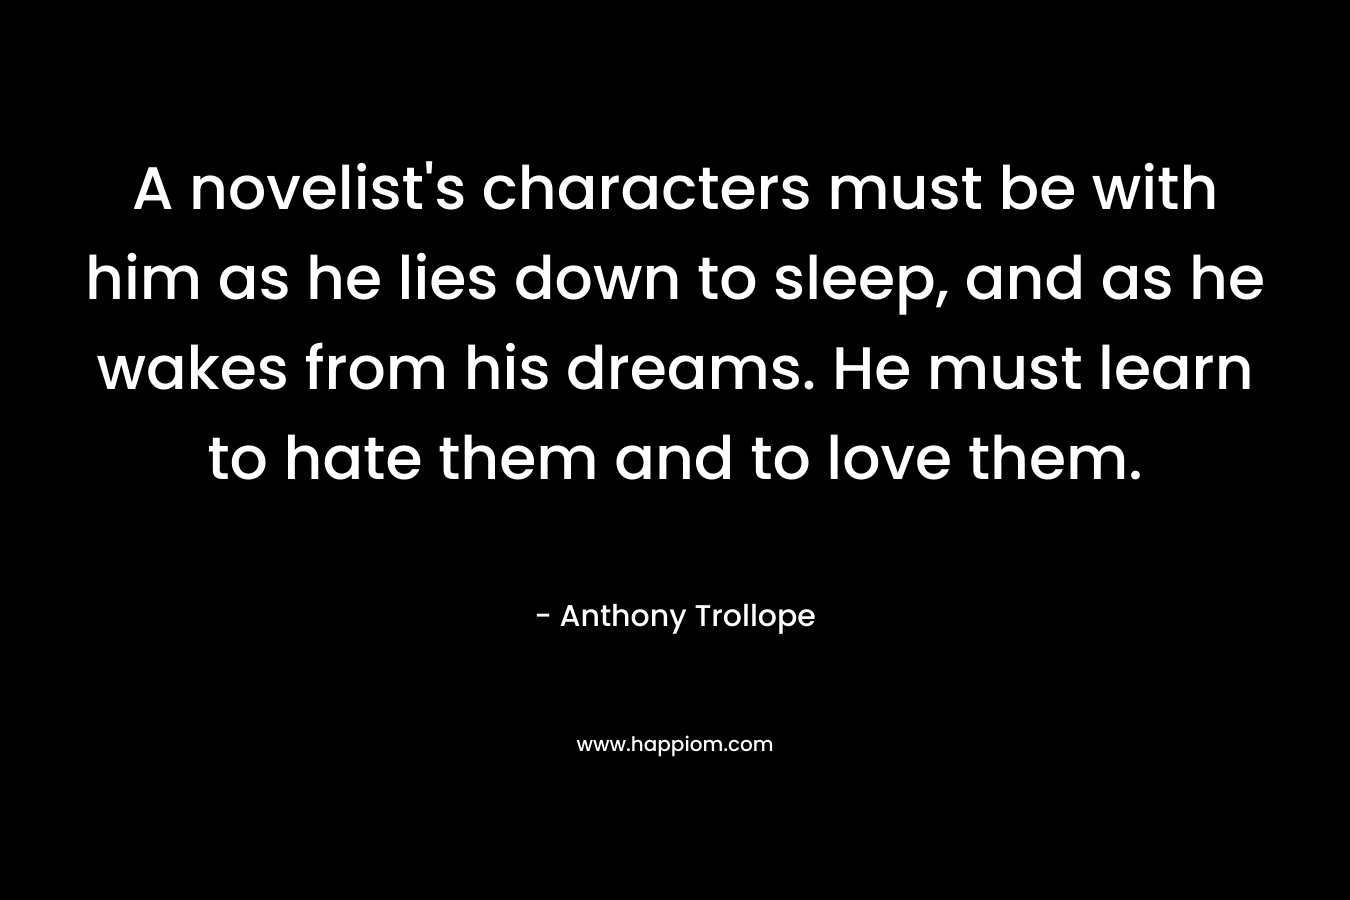 A novelist’s characters must be with him as he lies down to sleep, and as he wakes from his dreams. He must learn to hate them and to love them. – Anthony Trollope